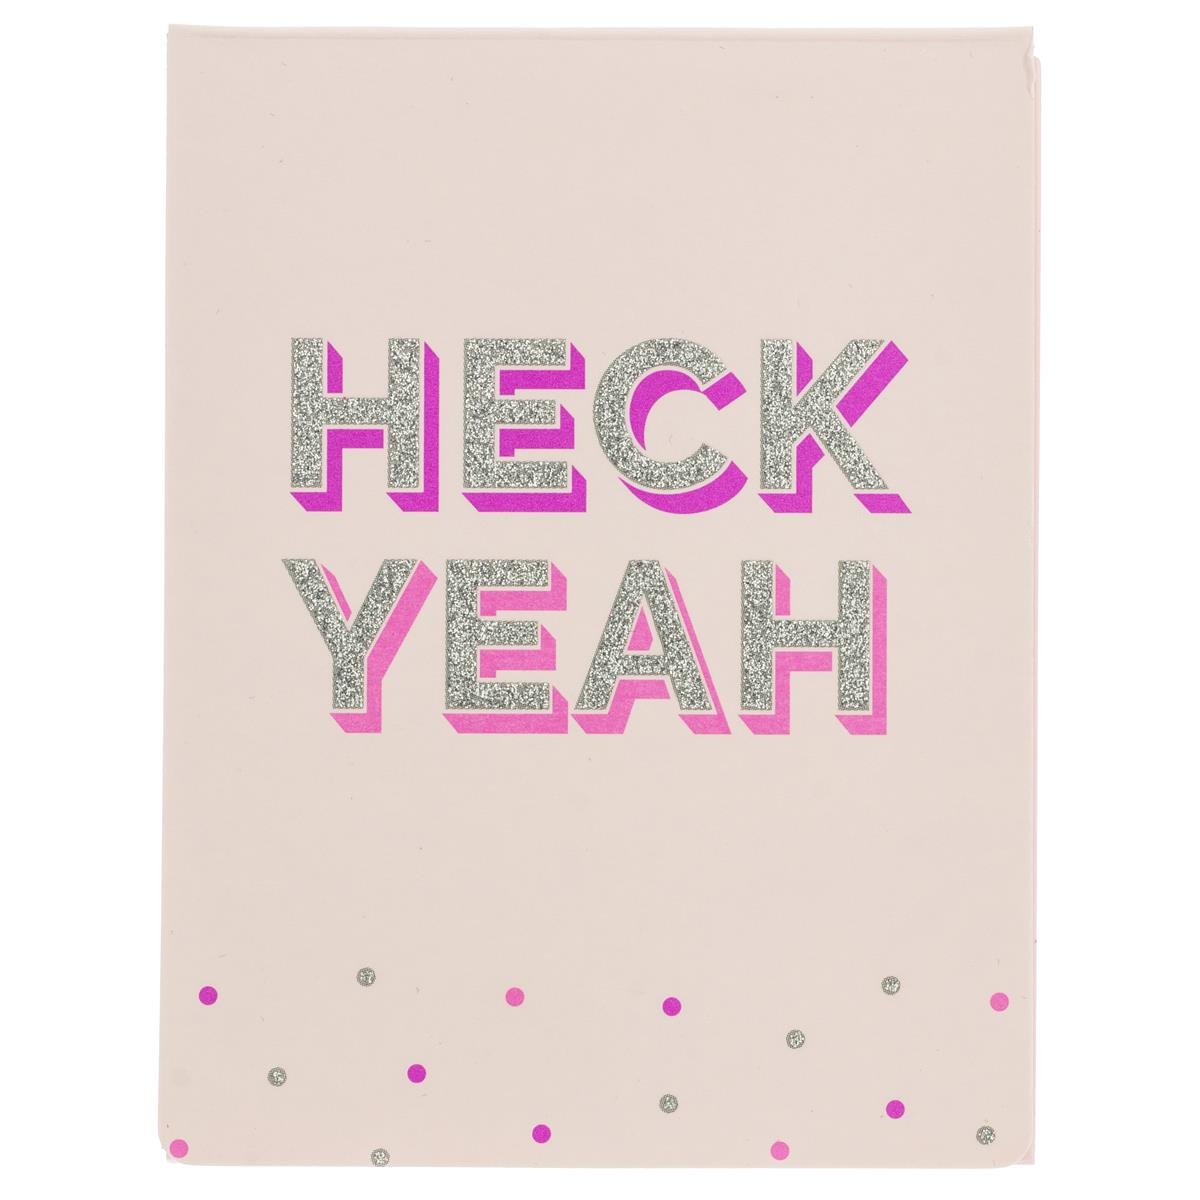 Heck Yeah Pocket Notepad in Blush Pink and Silver Glitter